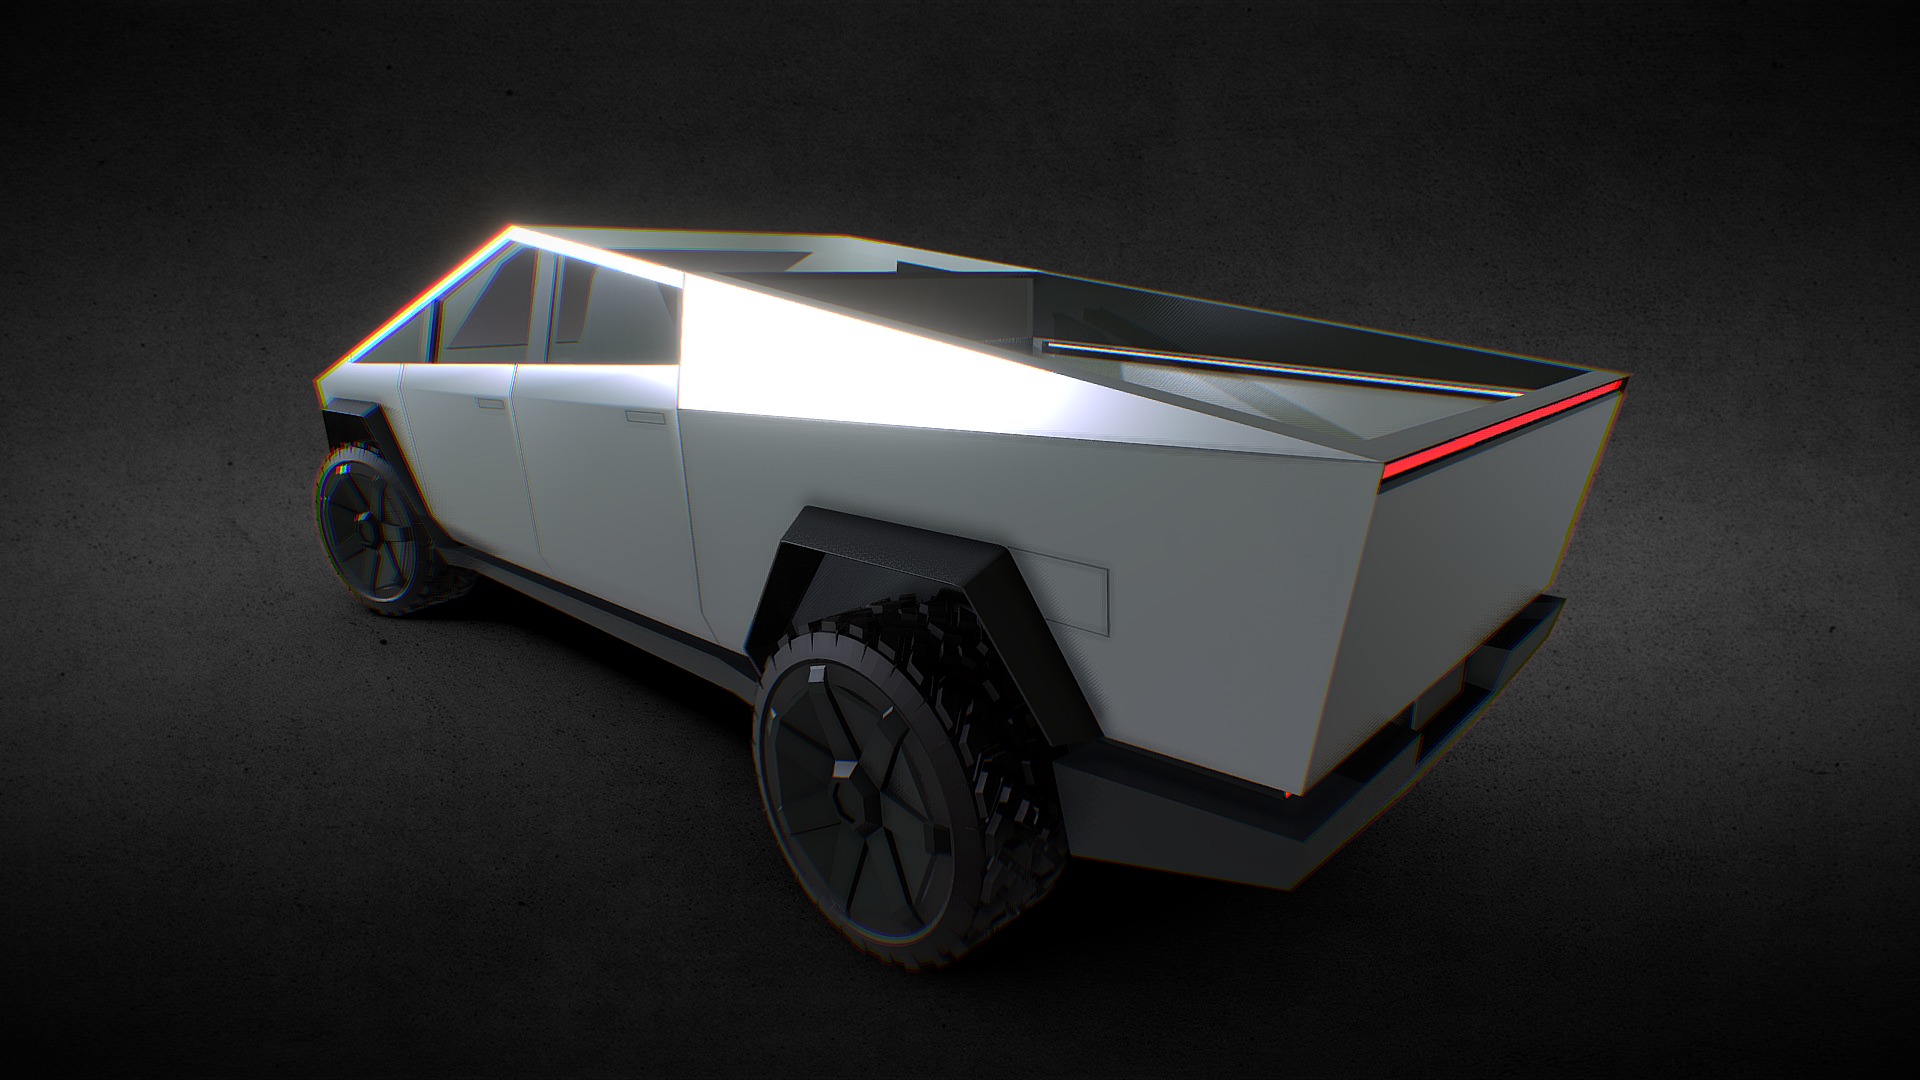 3D model Cybertruck Tesla - This is a 3D model of the Cybertruck Tesla. The 3D model is about a white car with a black background.